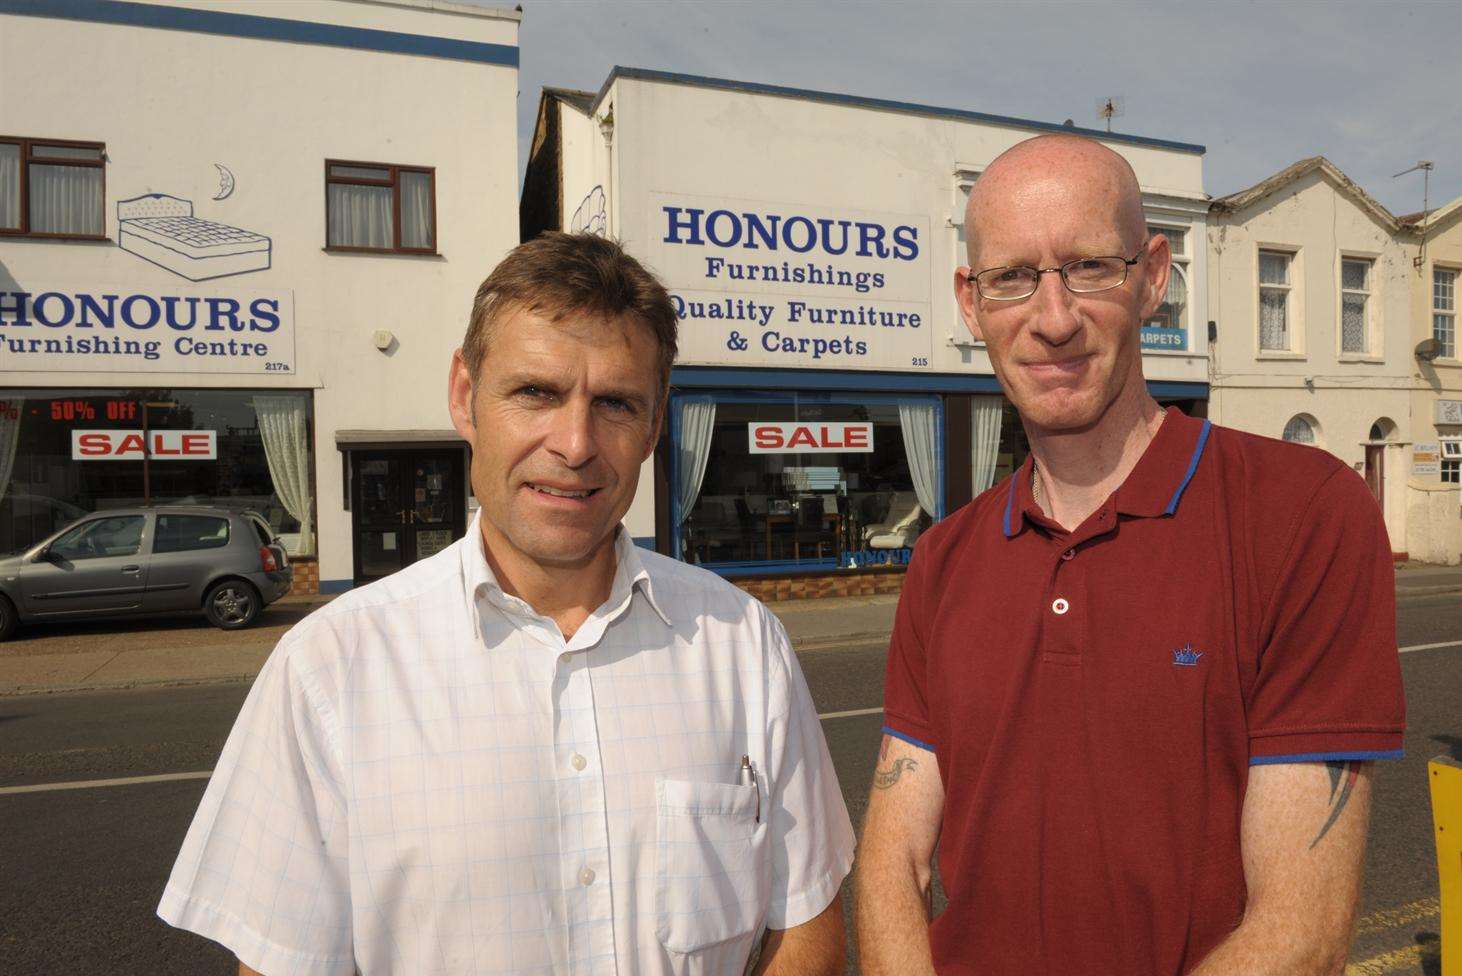 Chris Honour and Keith Tucker outside Honours Furnishings in Sheerness